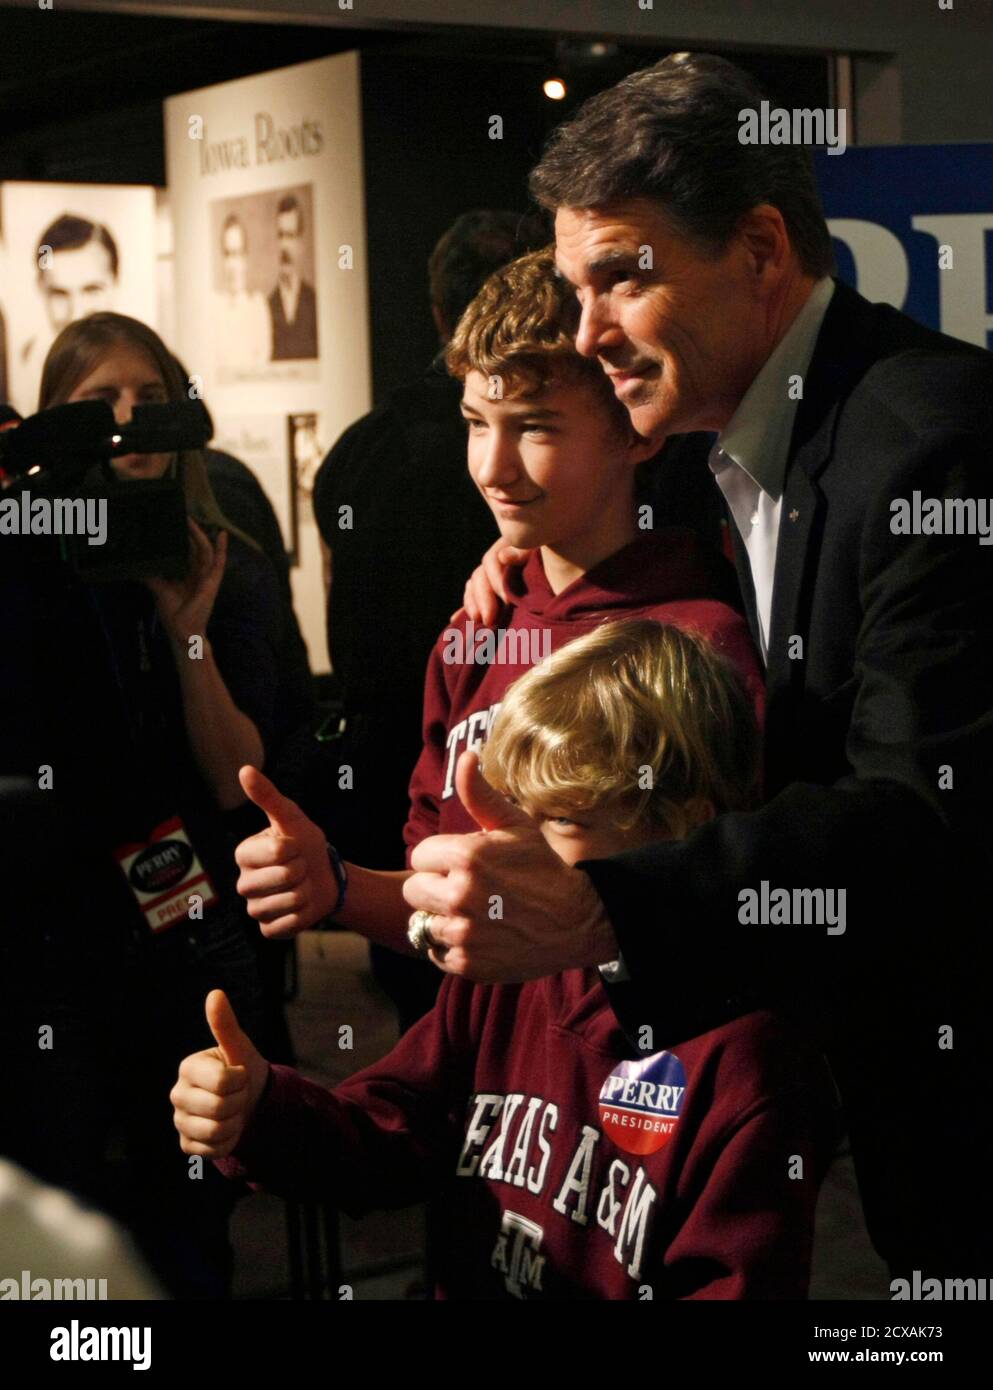 Republican presidential candidate Rick Perry poses with young supporters at the Glenn Miller museum at a campaign stop in Clarinda, Iowa December 27, 2011. REUTERS/Rick Wilking (UNITED STATES - Tags: POLITICS) Stock Photo